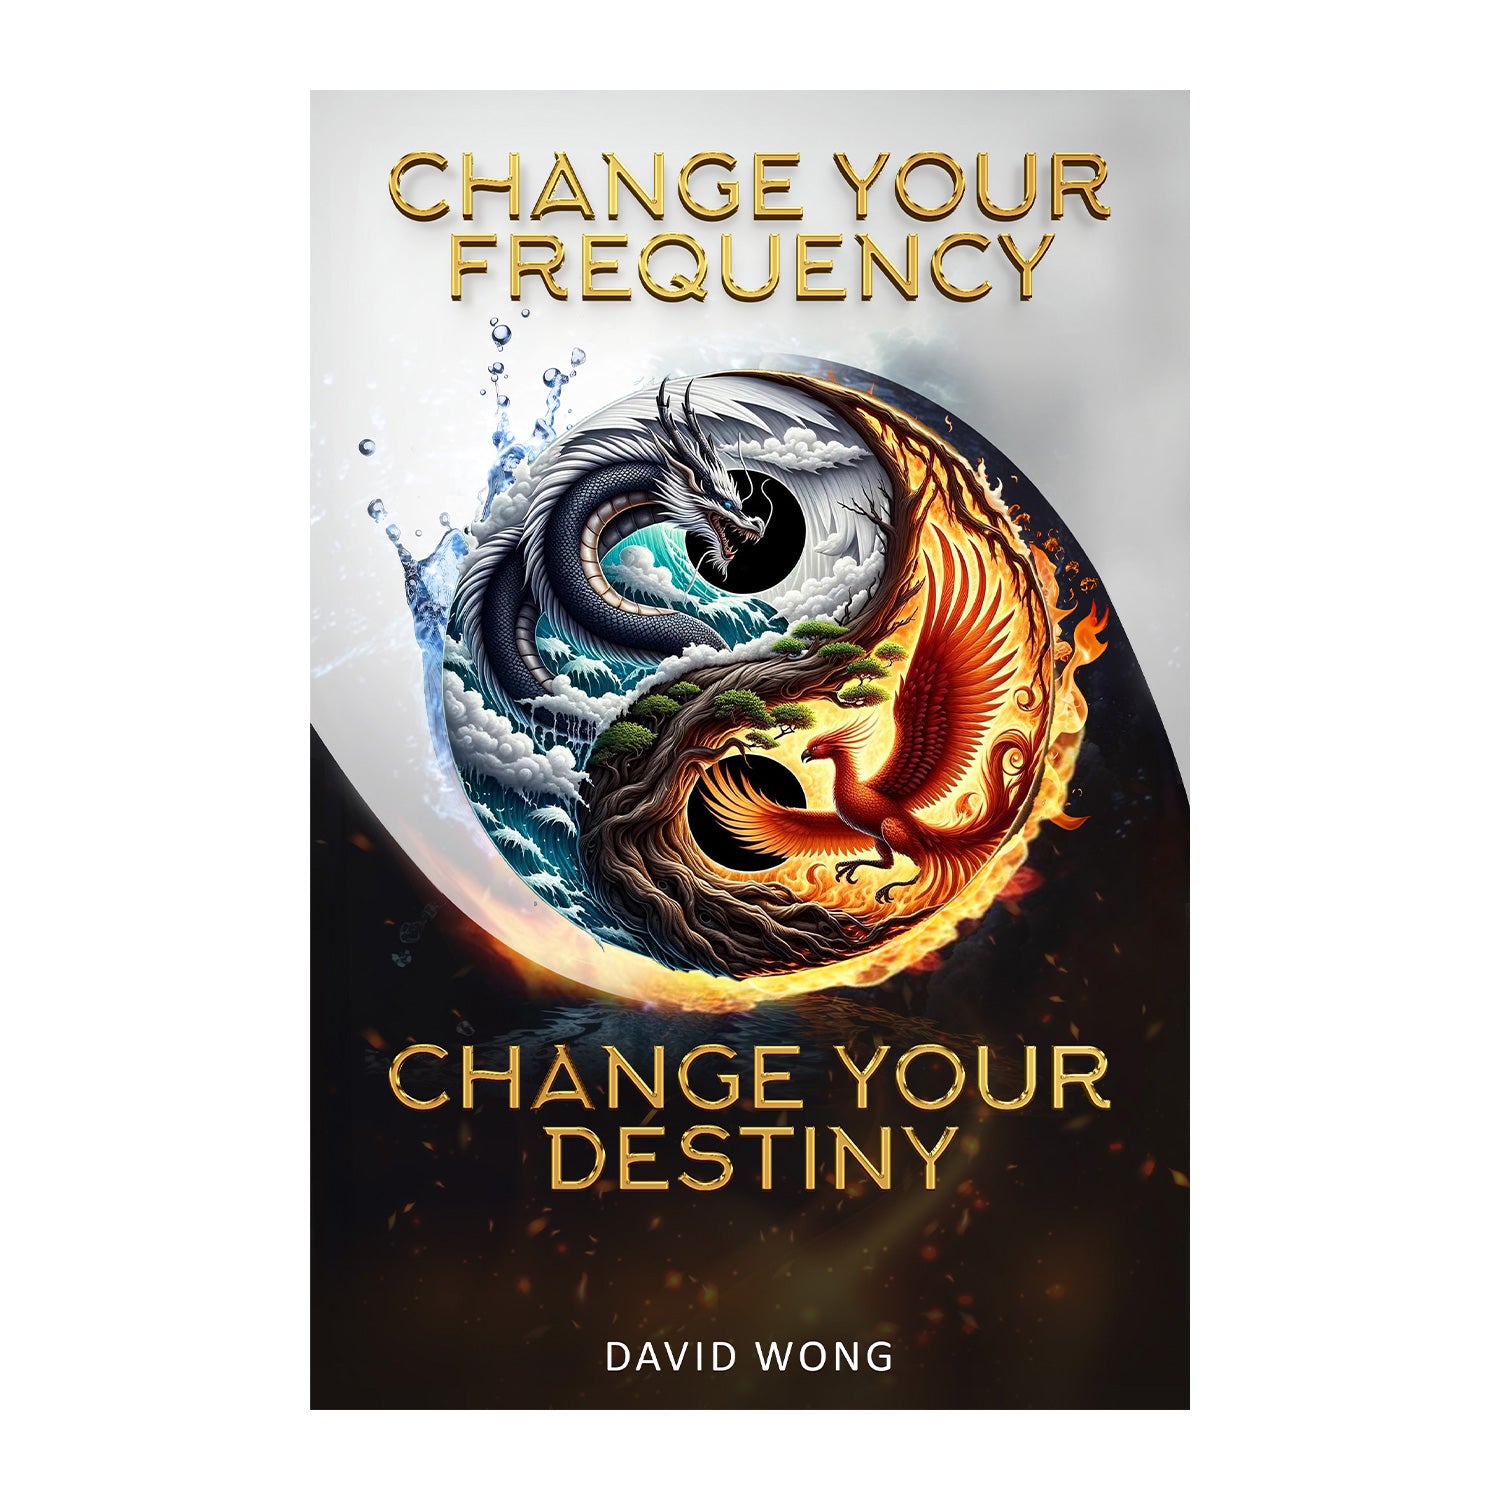 Change Your Frequency, Change Your Destiny - The Science of Prosperity (Ebook & Audiobook)